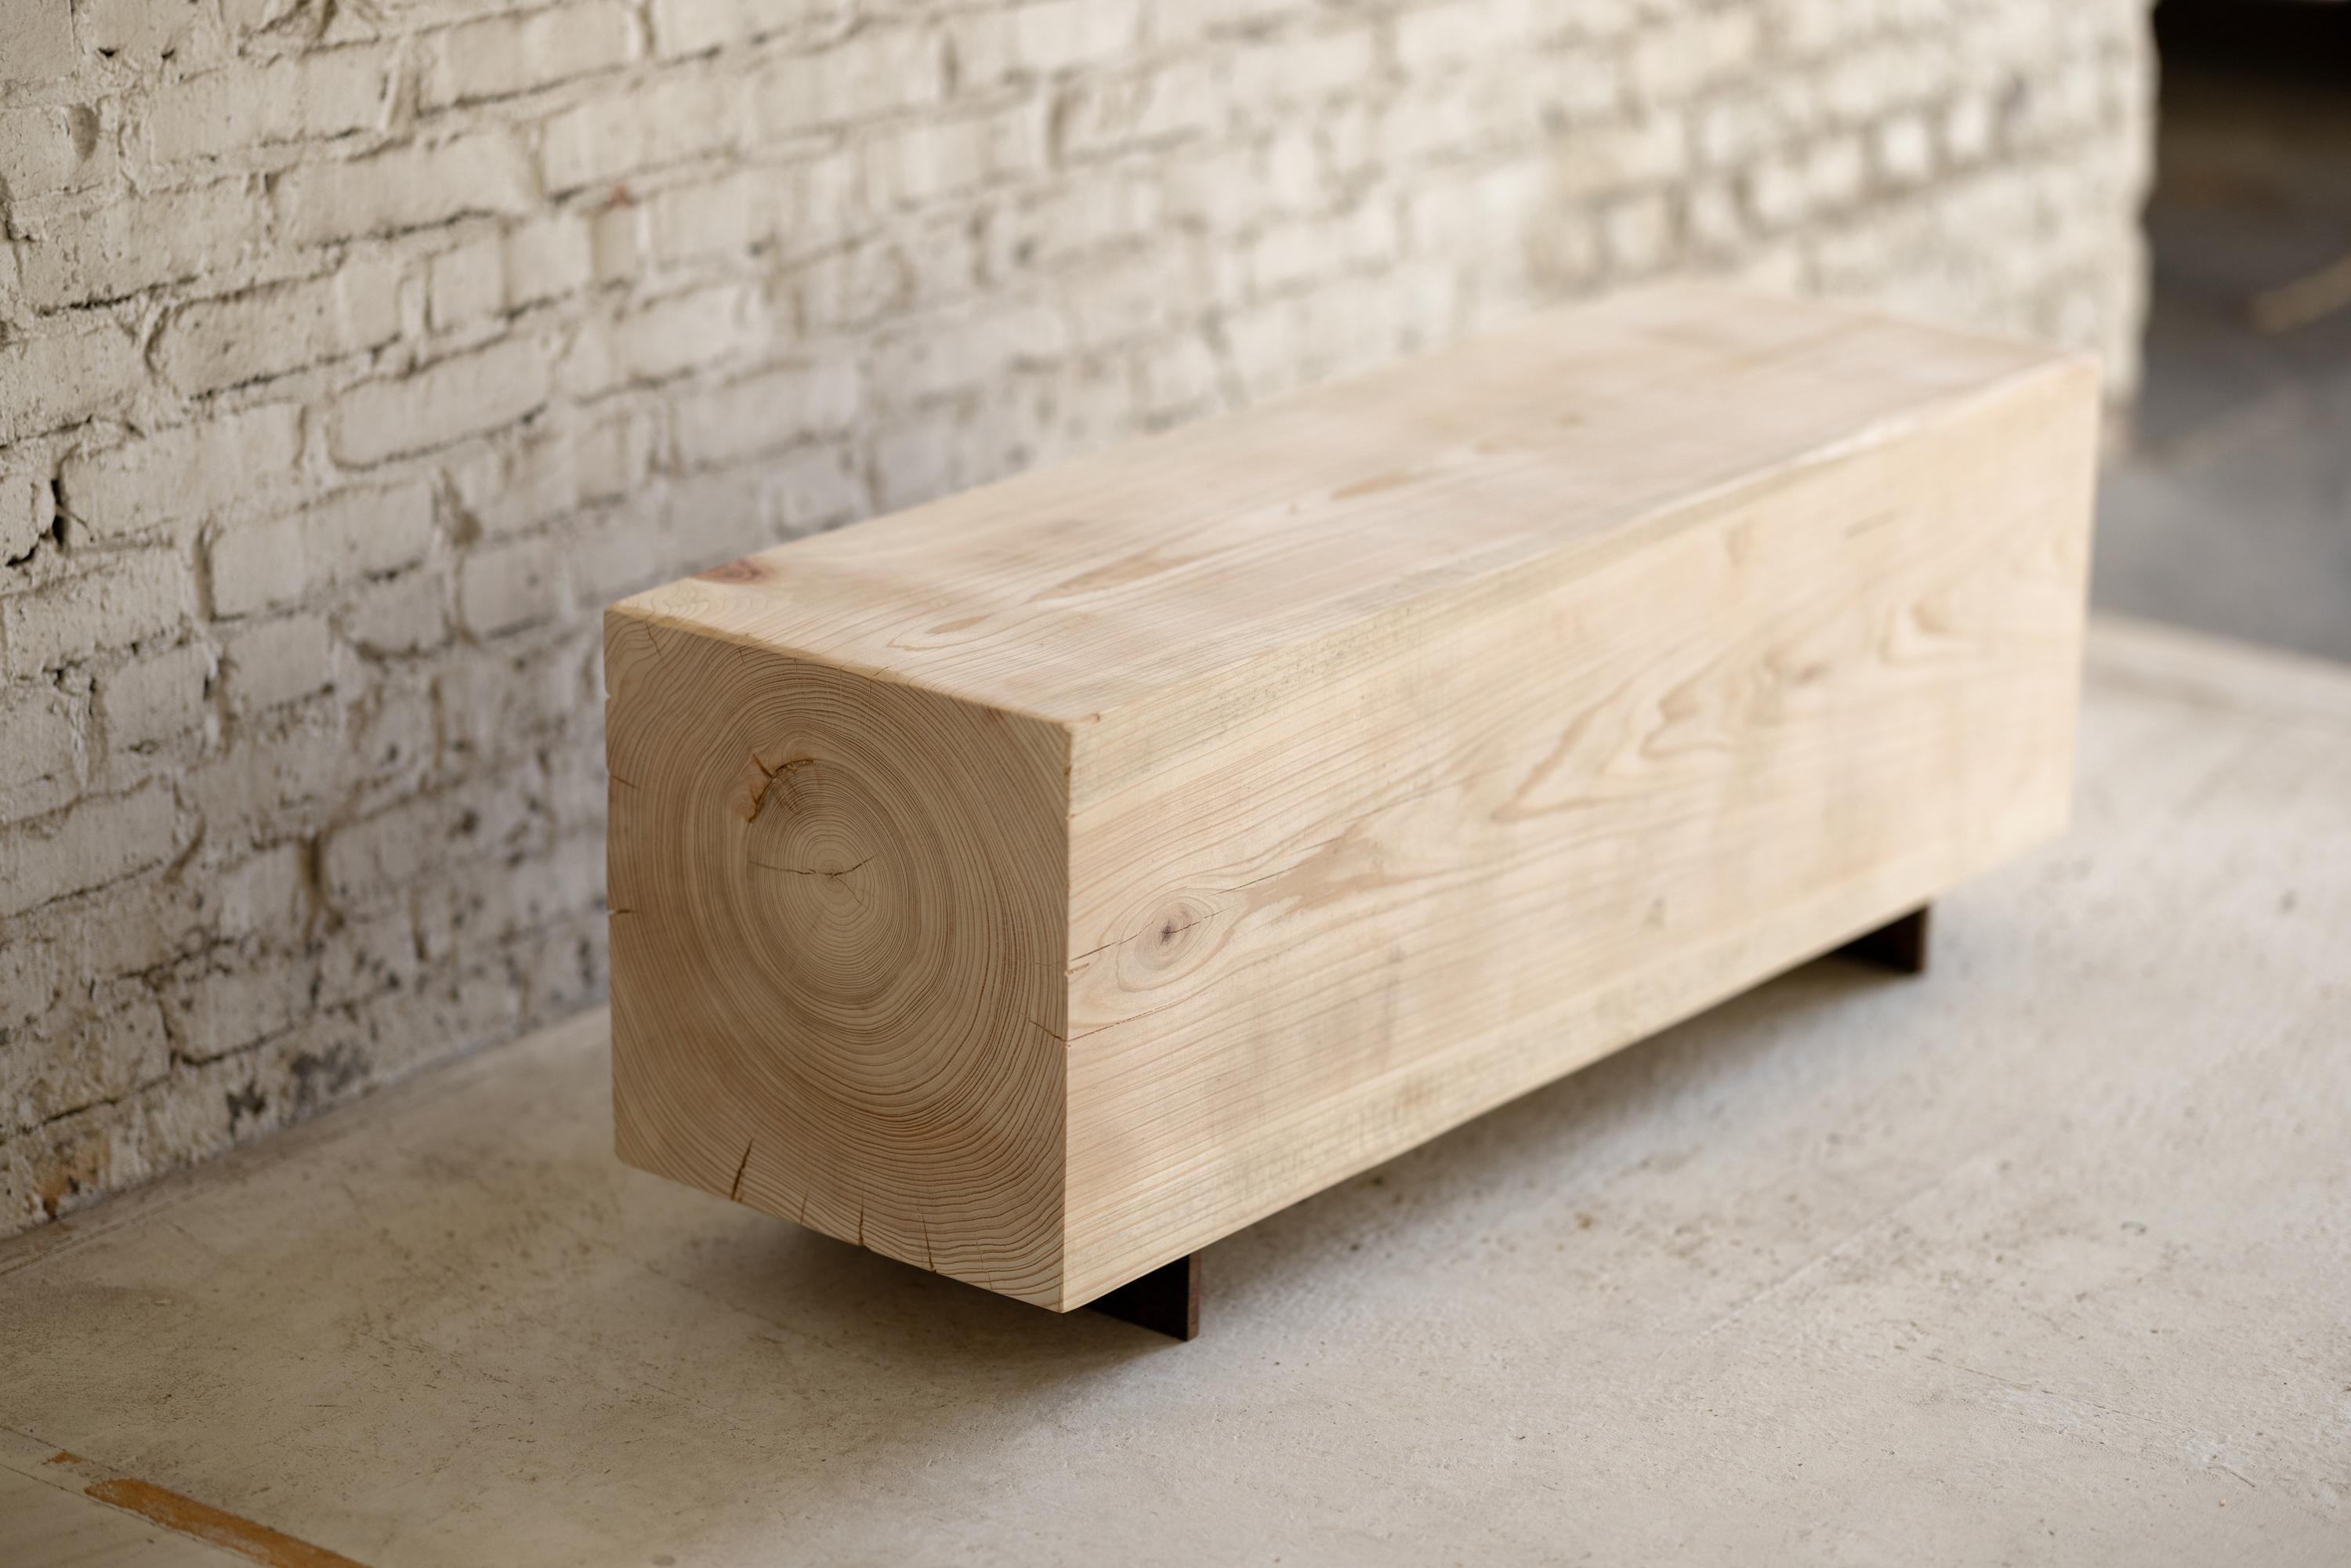 Our wood beam bench in cypress utilizes salvaged wood logs for a rustic seating experience. Narrow and backless, the simple lines express the natural texture of the end grain. The 15